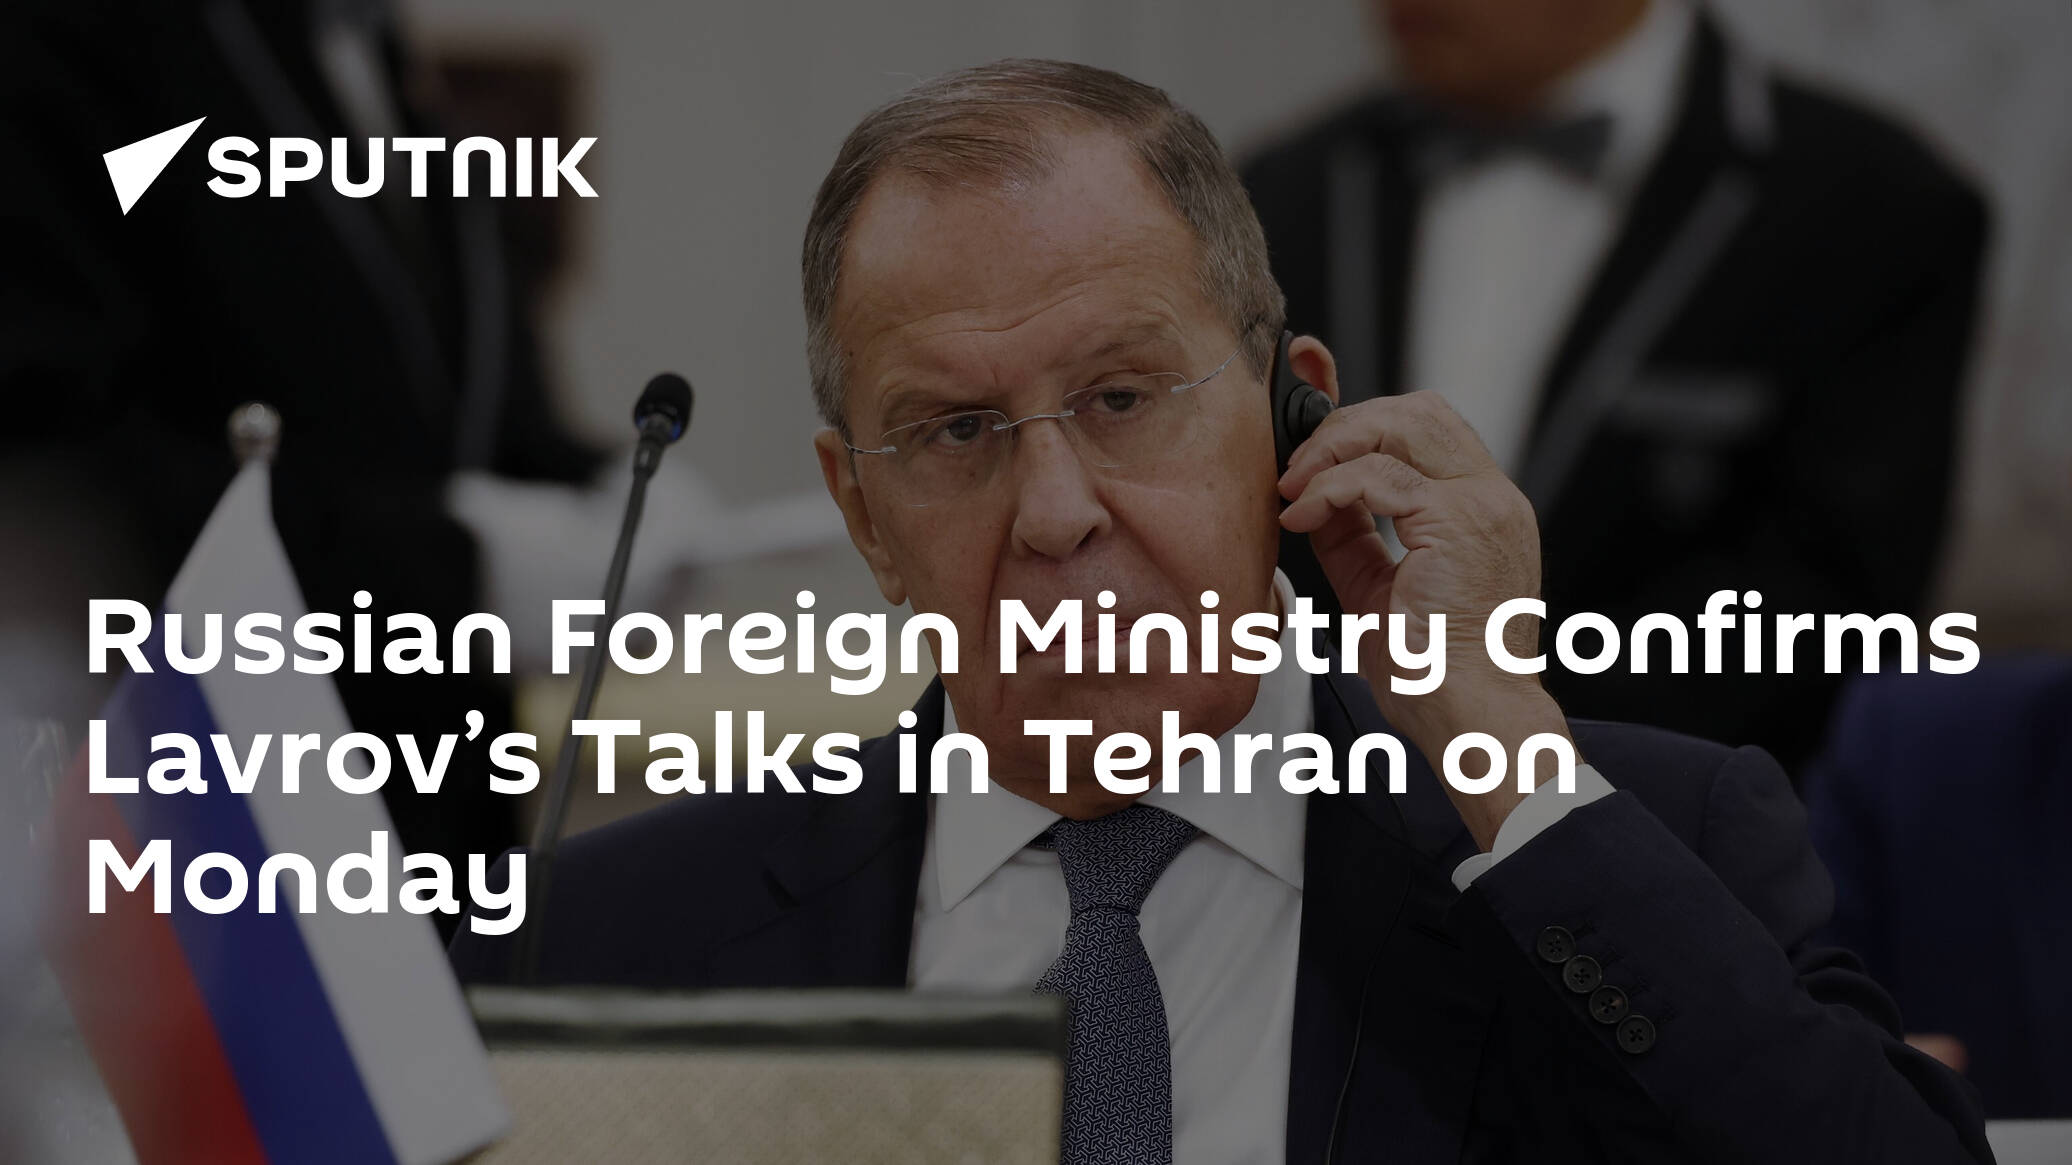 Russian Foreign Ministry Confirms Lavrov’s Talks in Tehran on Monday